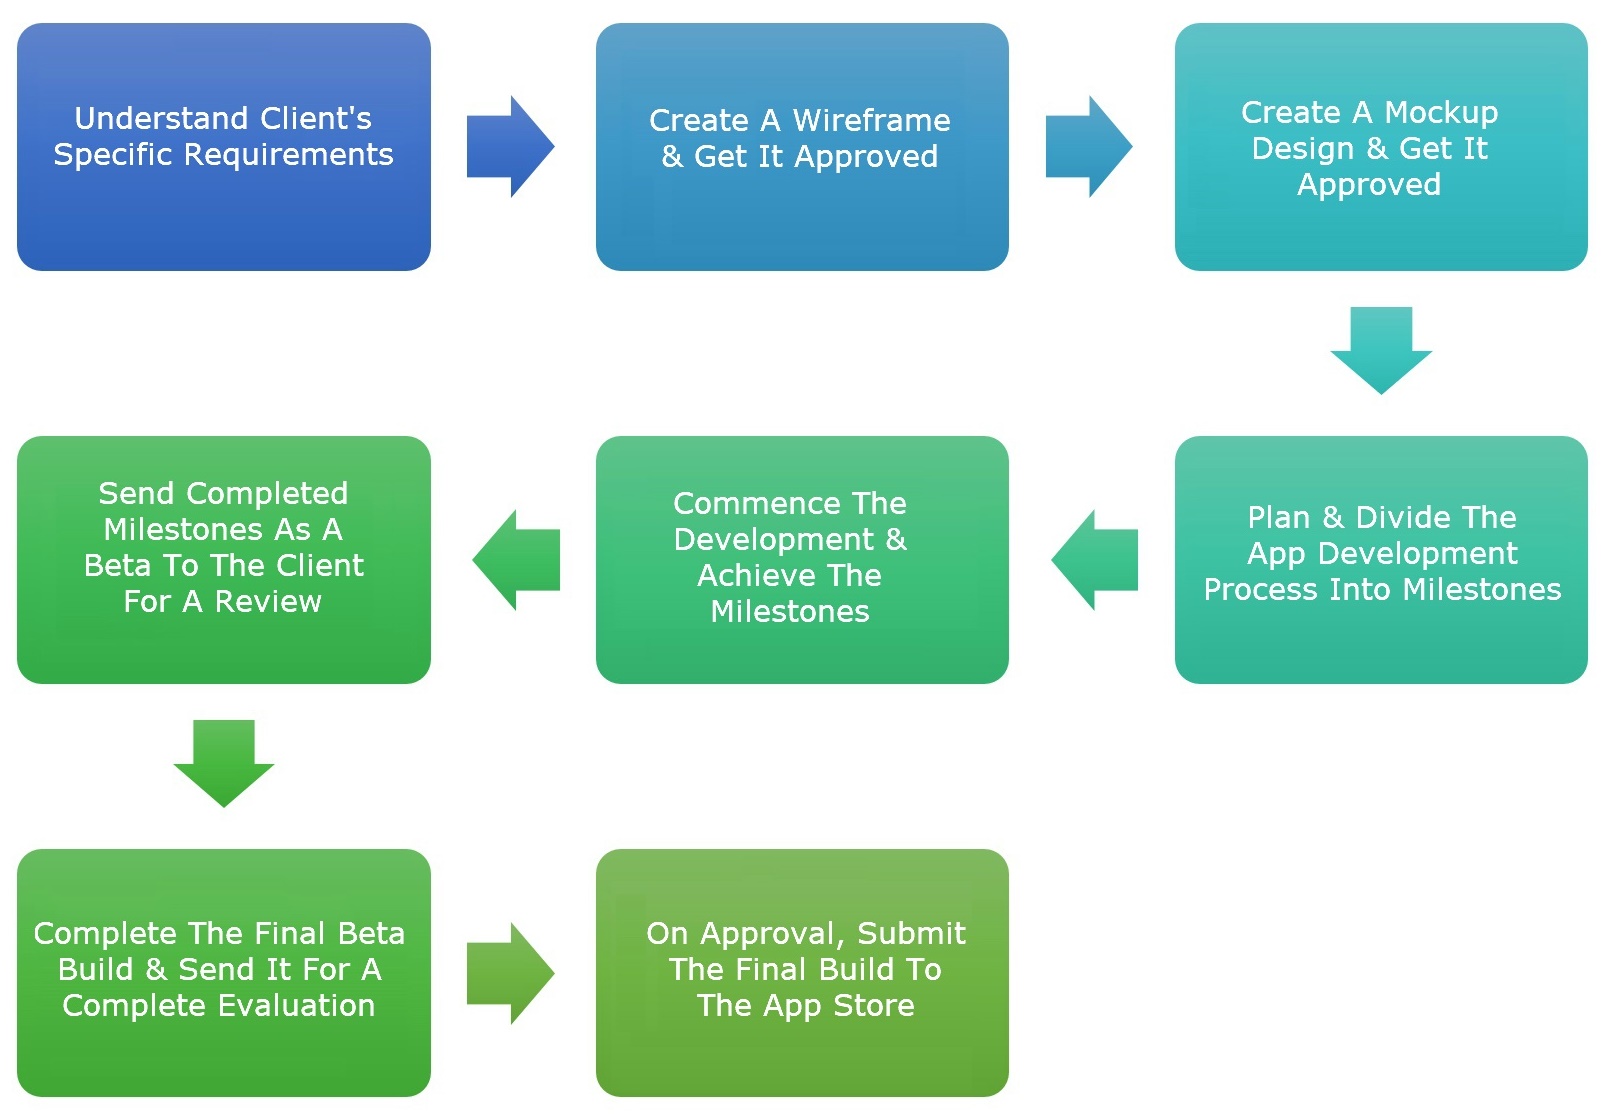 Our mHealth App Development Process